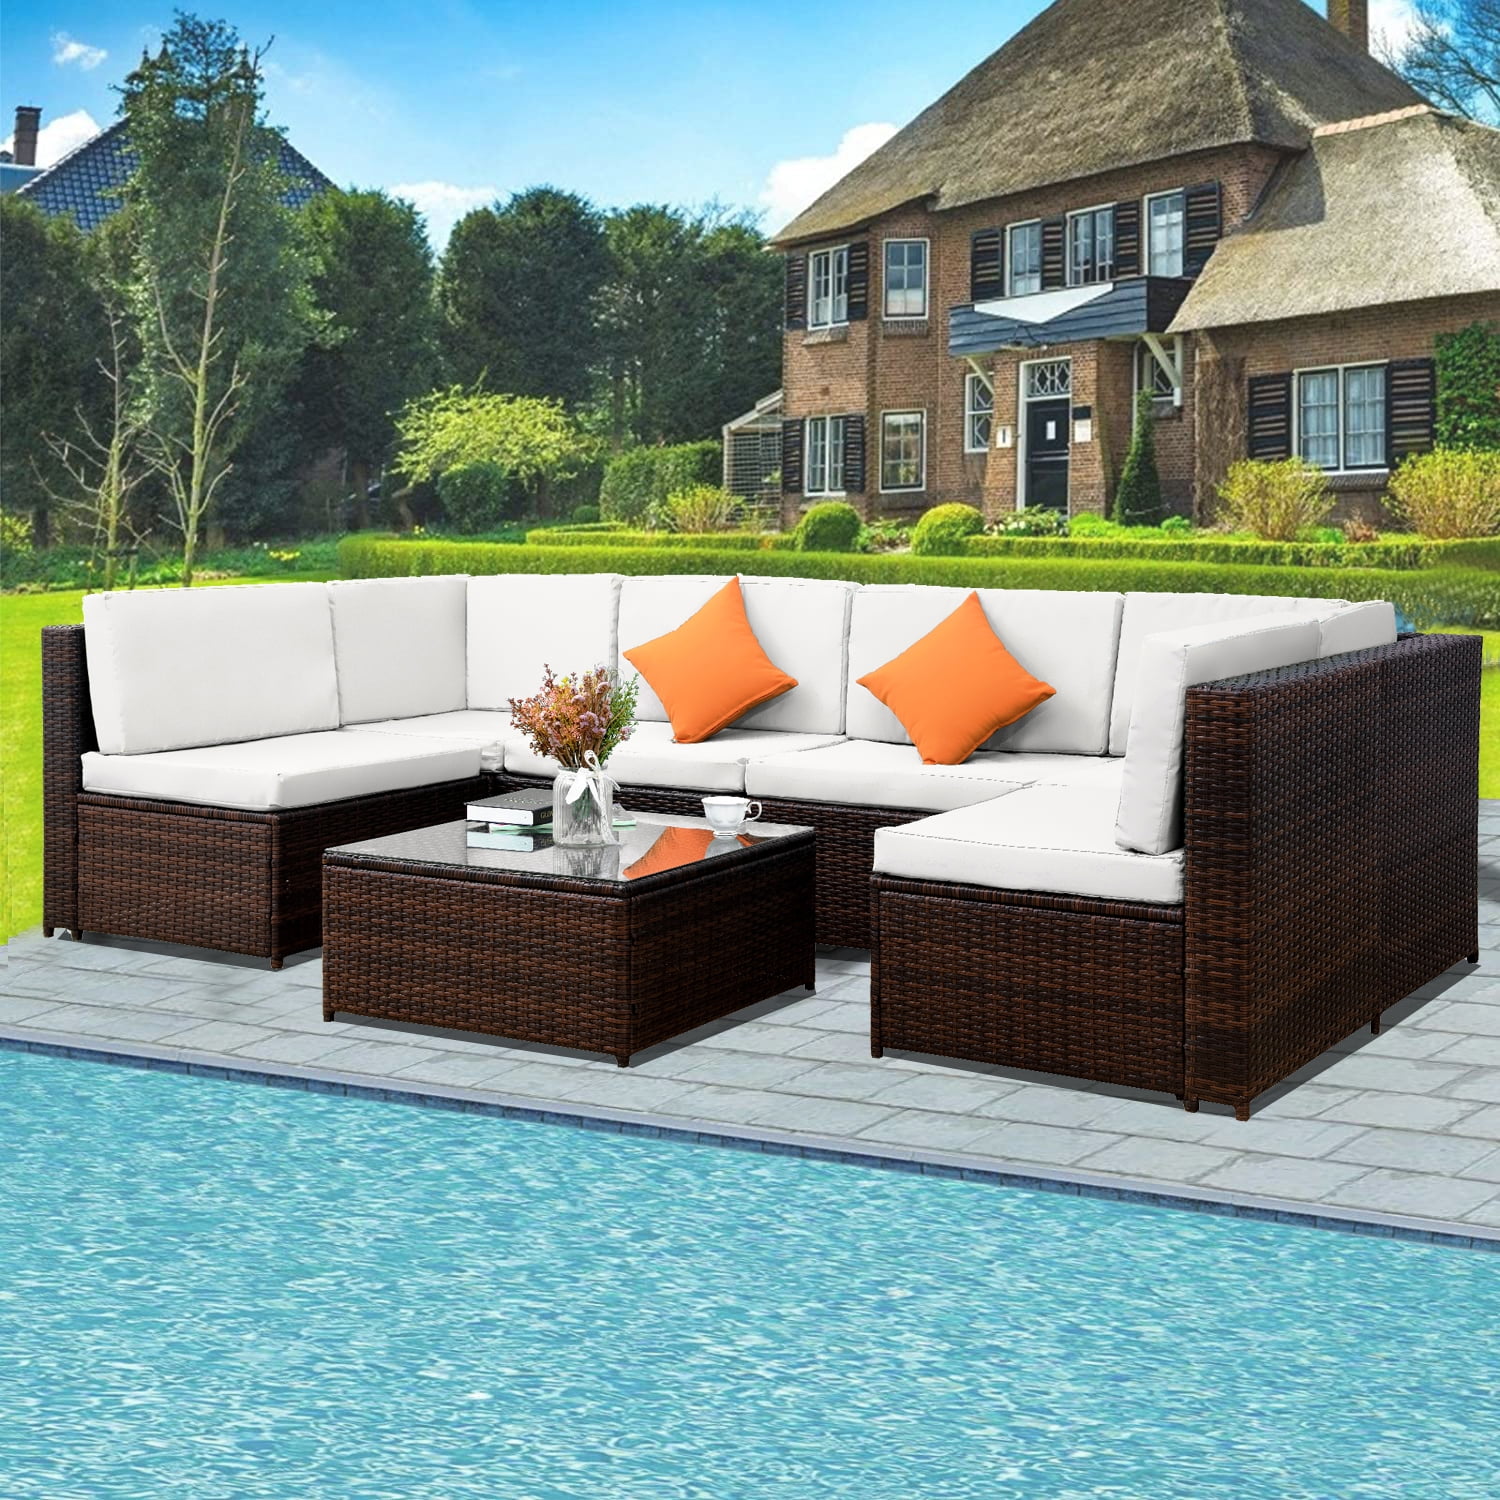 uhomepro patio conversation sets, 7 piece outdoor furniture set with